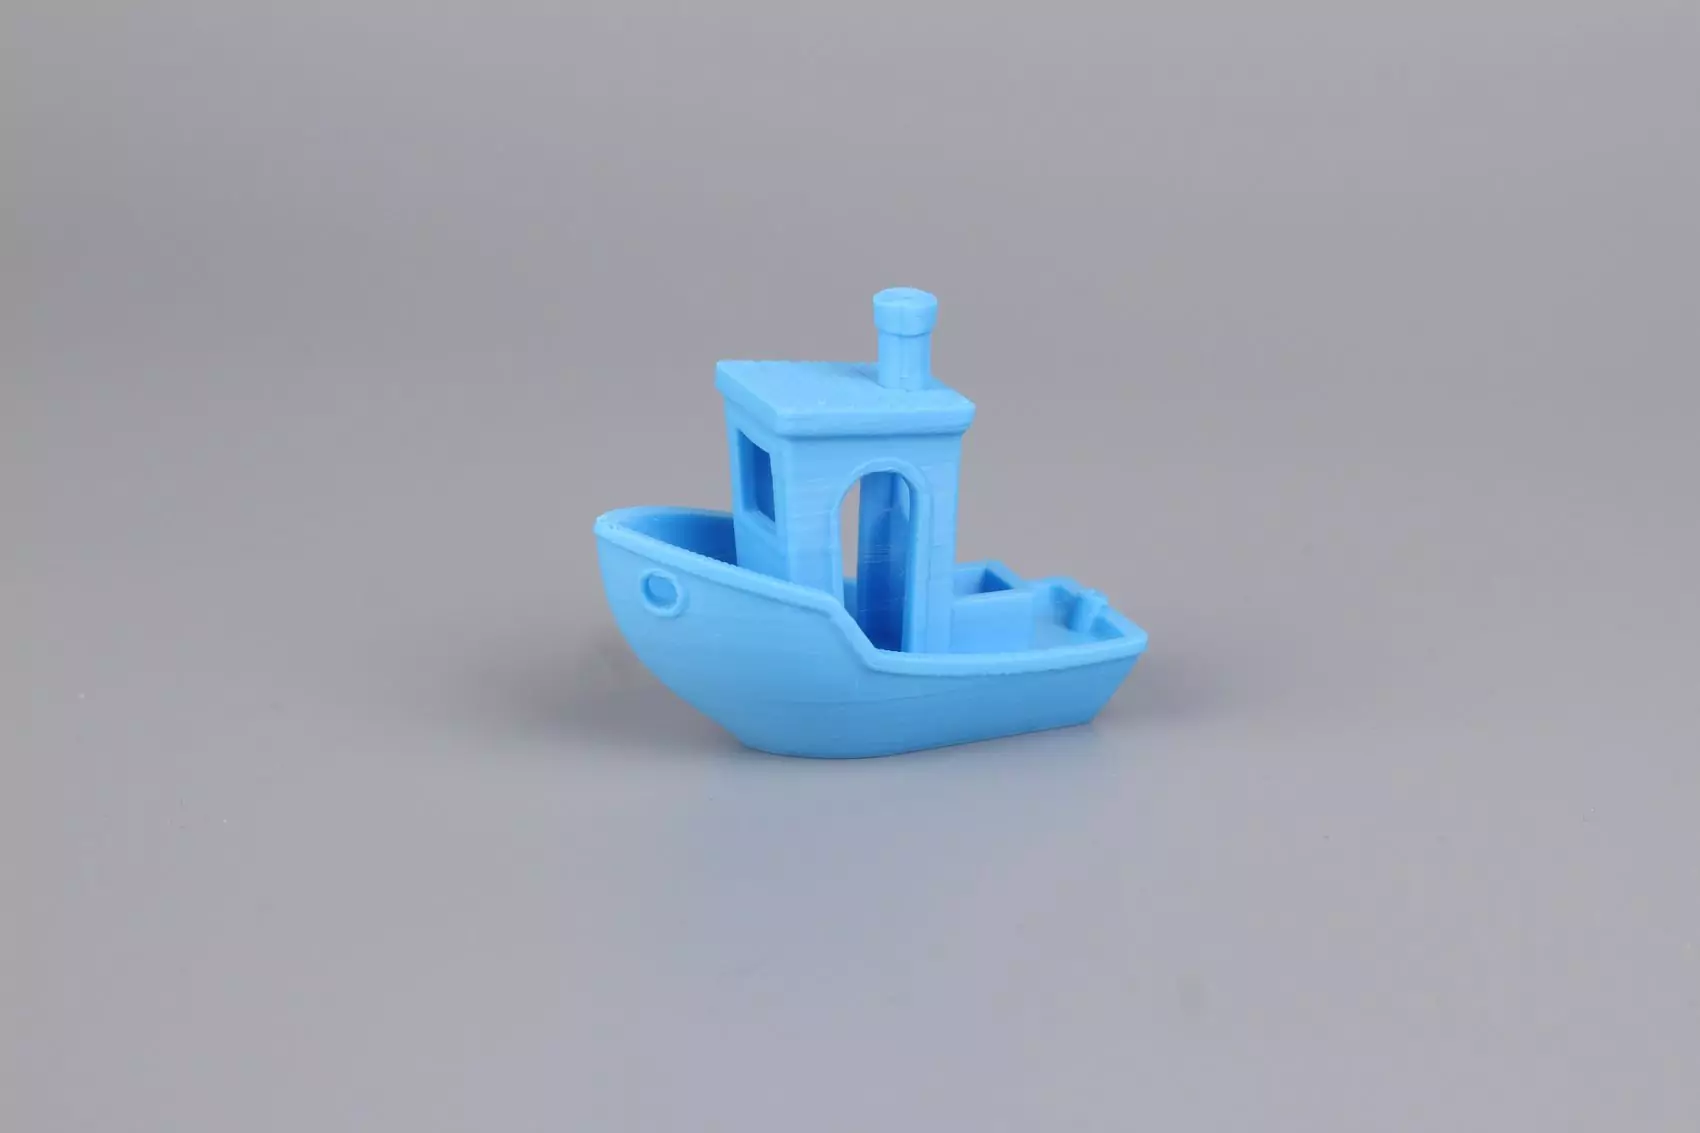 Ender 5 S1 Review 3D benchy2 | Creality Ender-5 S1 Review: Is it a worthy upgrade?